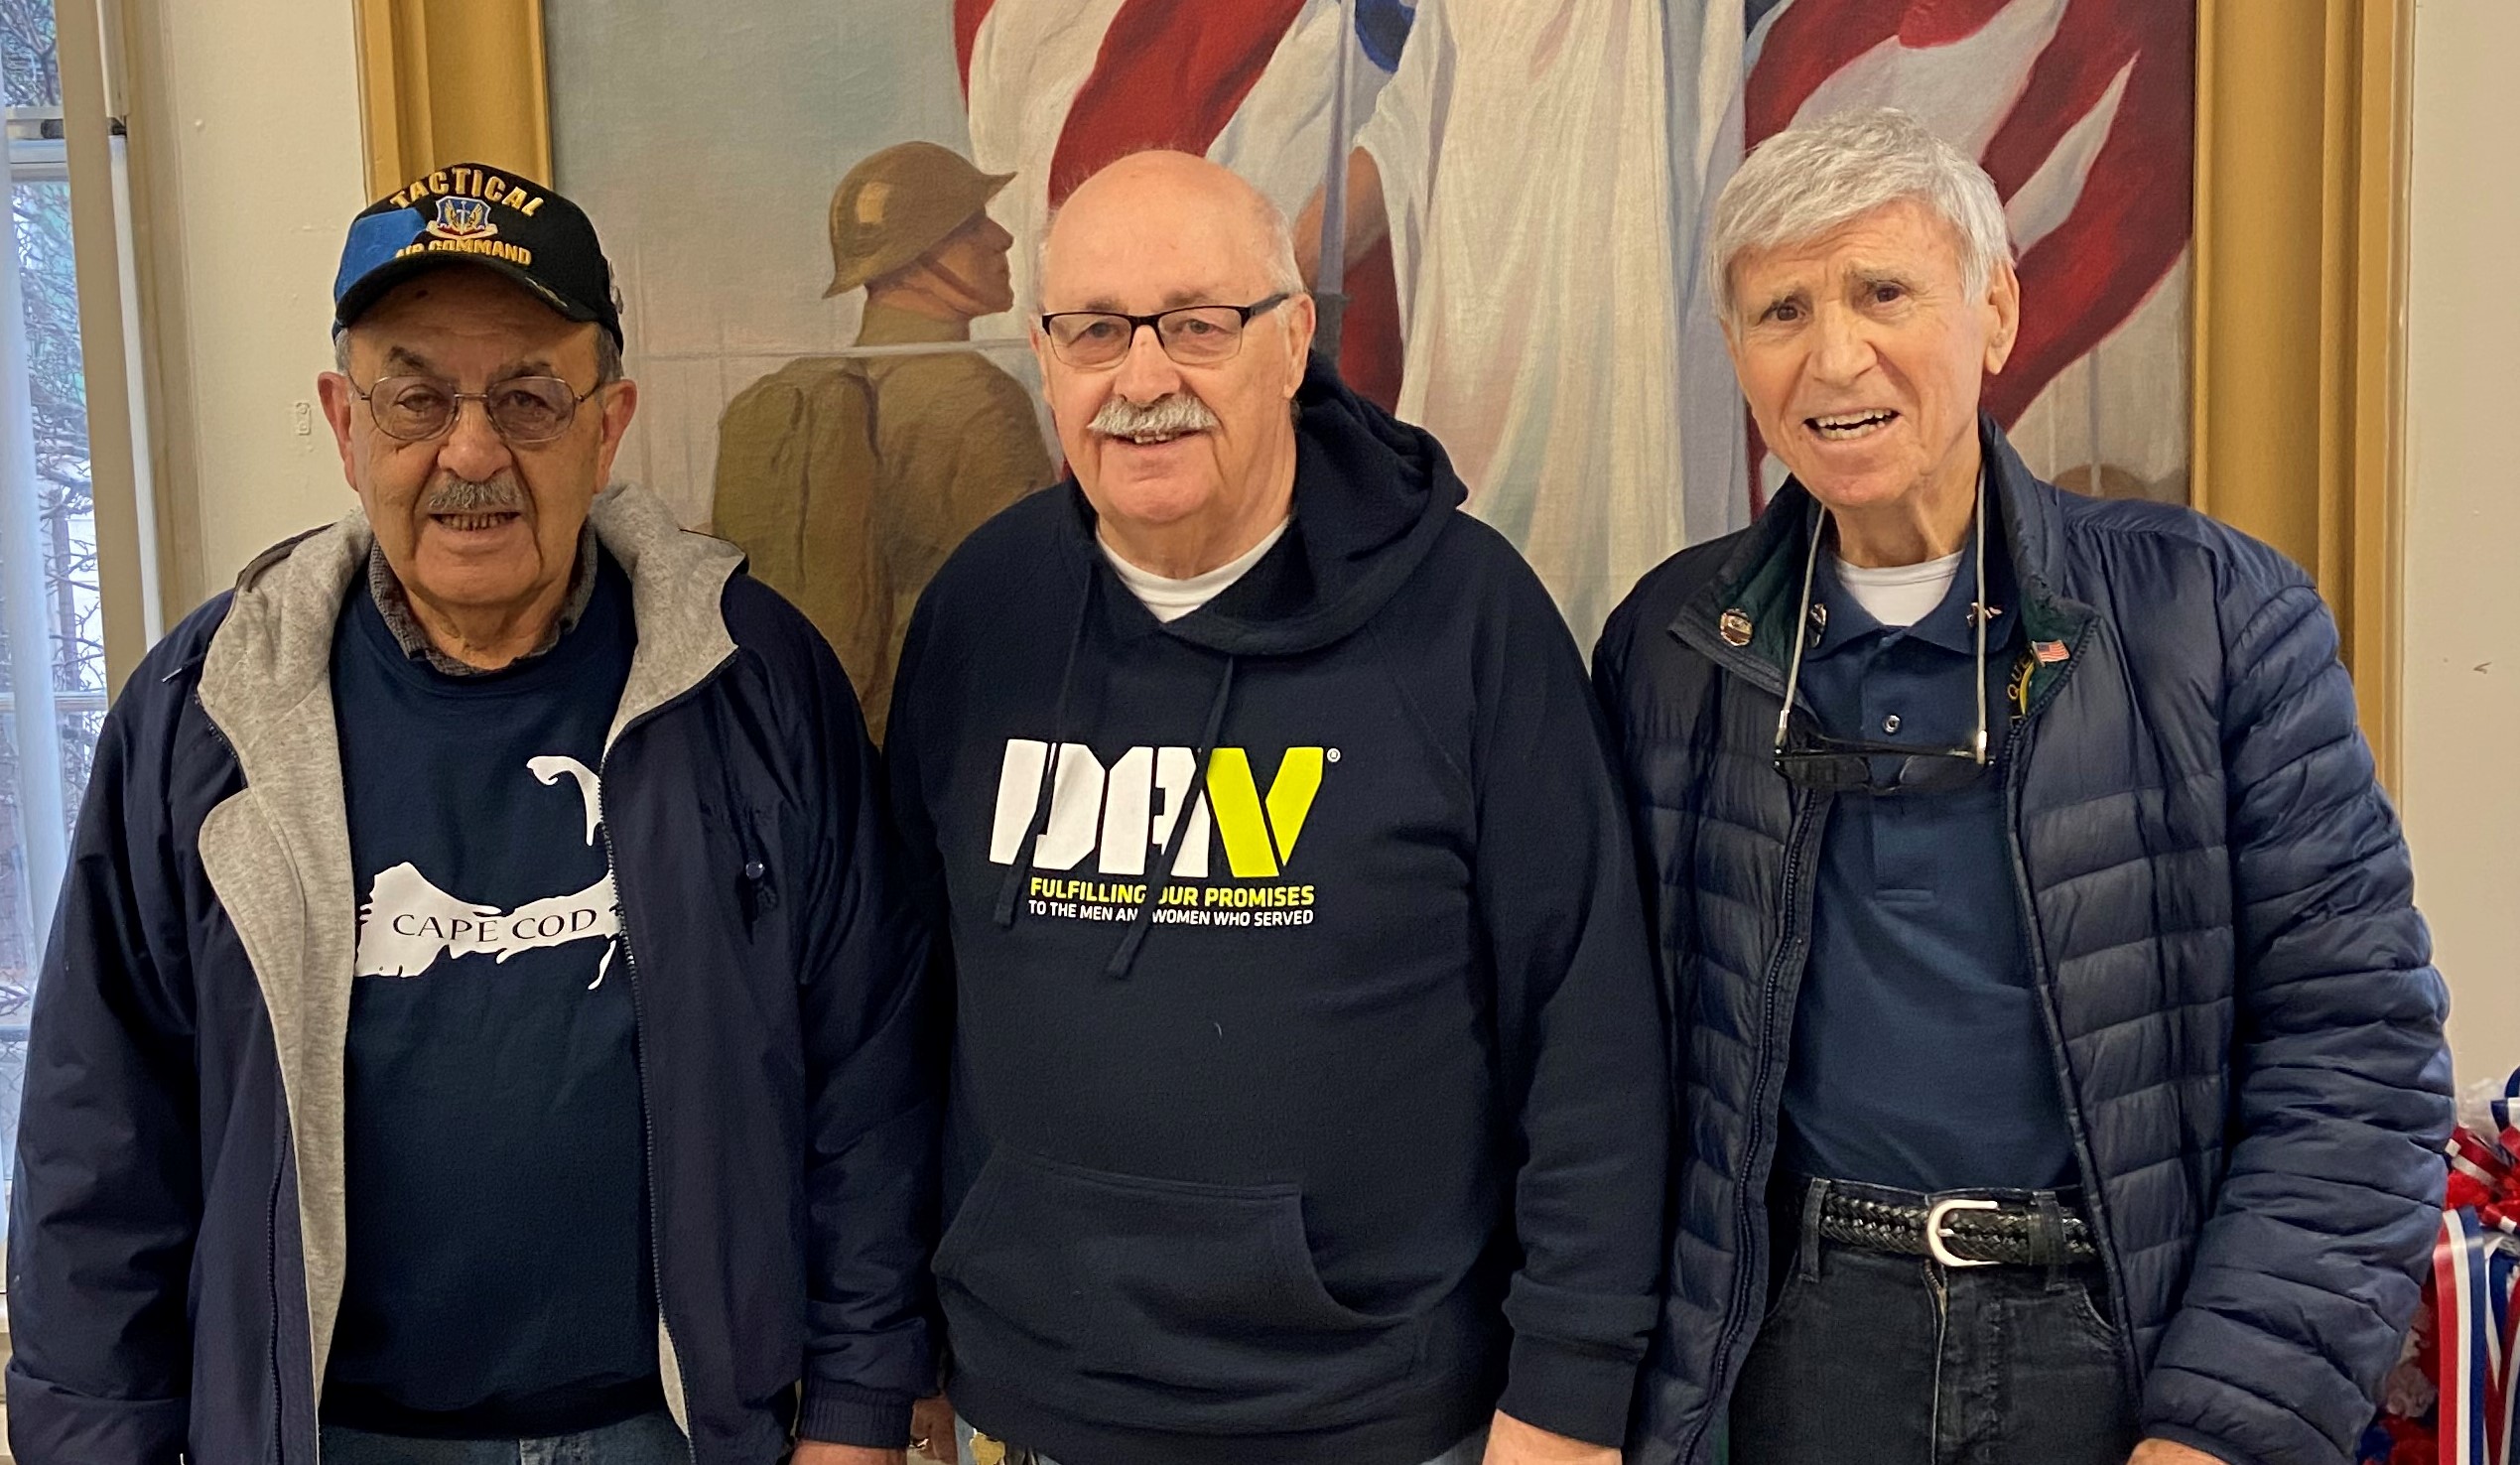 HEROES IN OUR MIDST – Don Silba, Joseph Augusta, Joe DiZoglio, and the Vets at the Lawrence DAV!